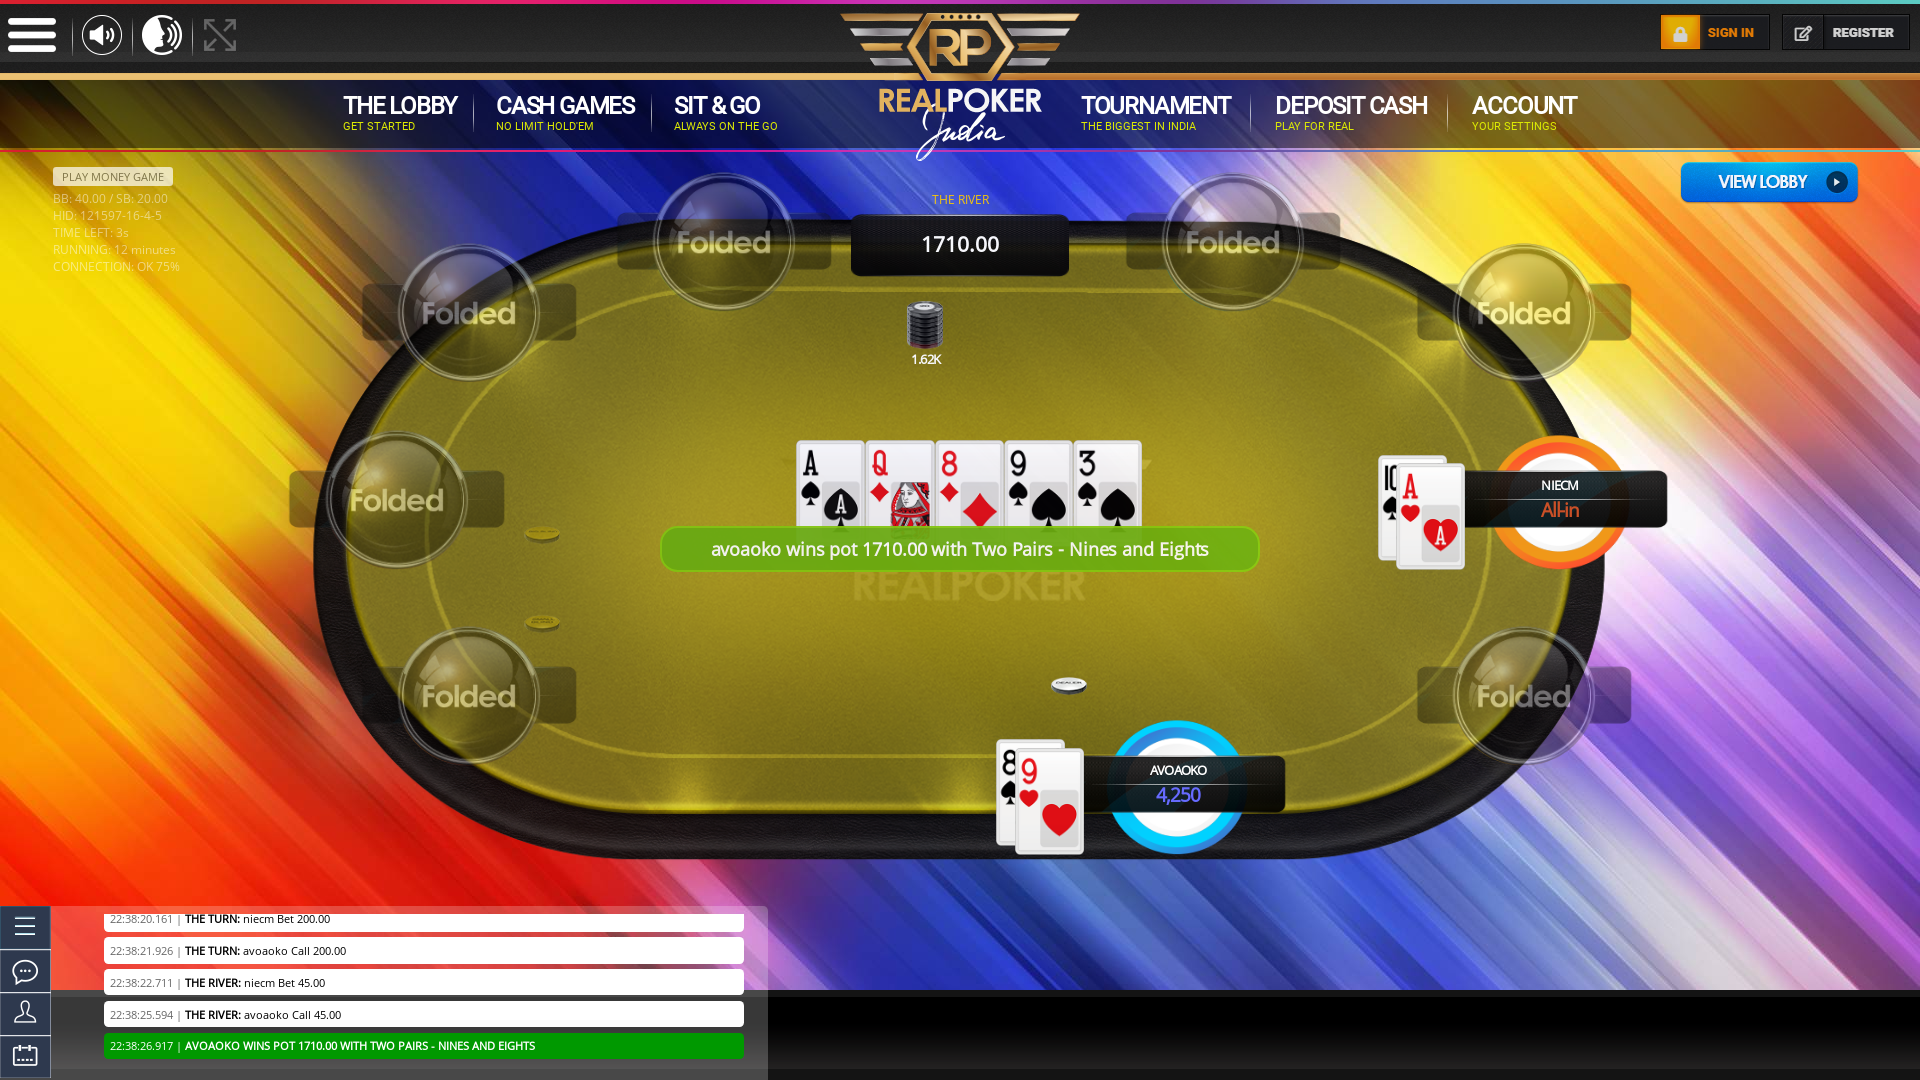 Real Indian poker on a 10 player table in the 12th minute of the game